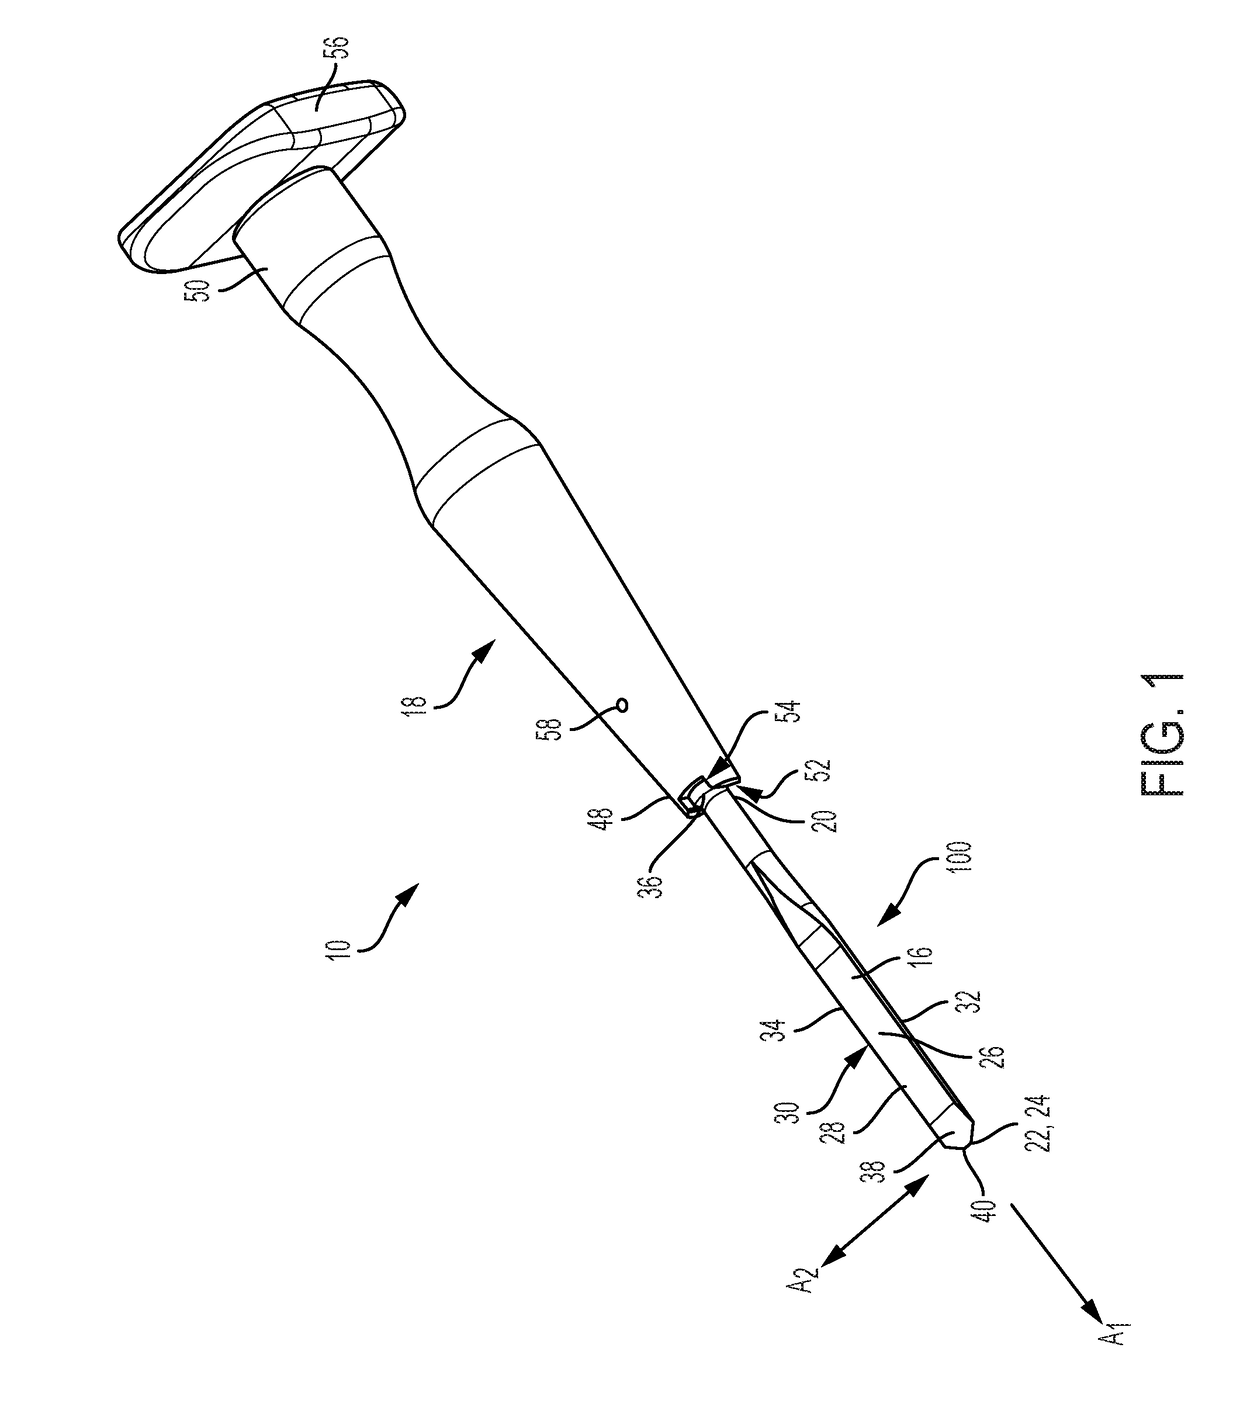 Femoral hip stem explant system and methods of using the same